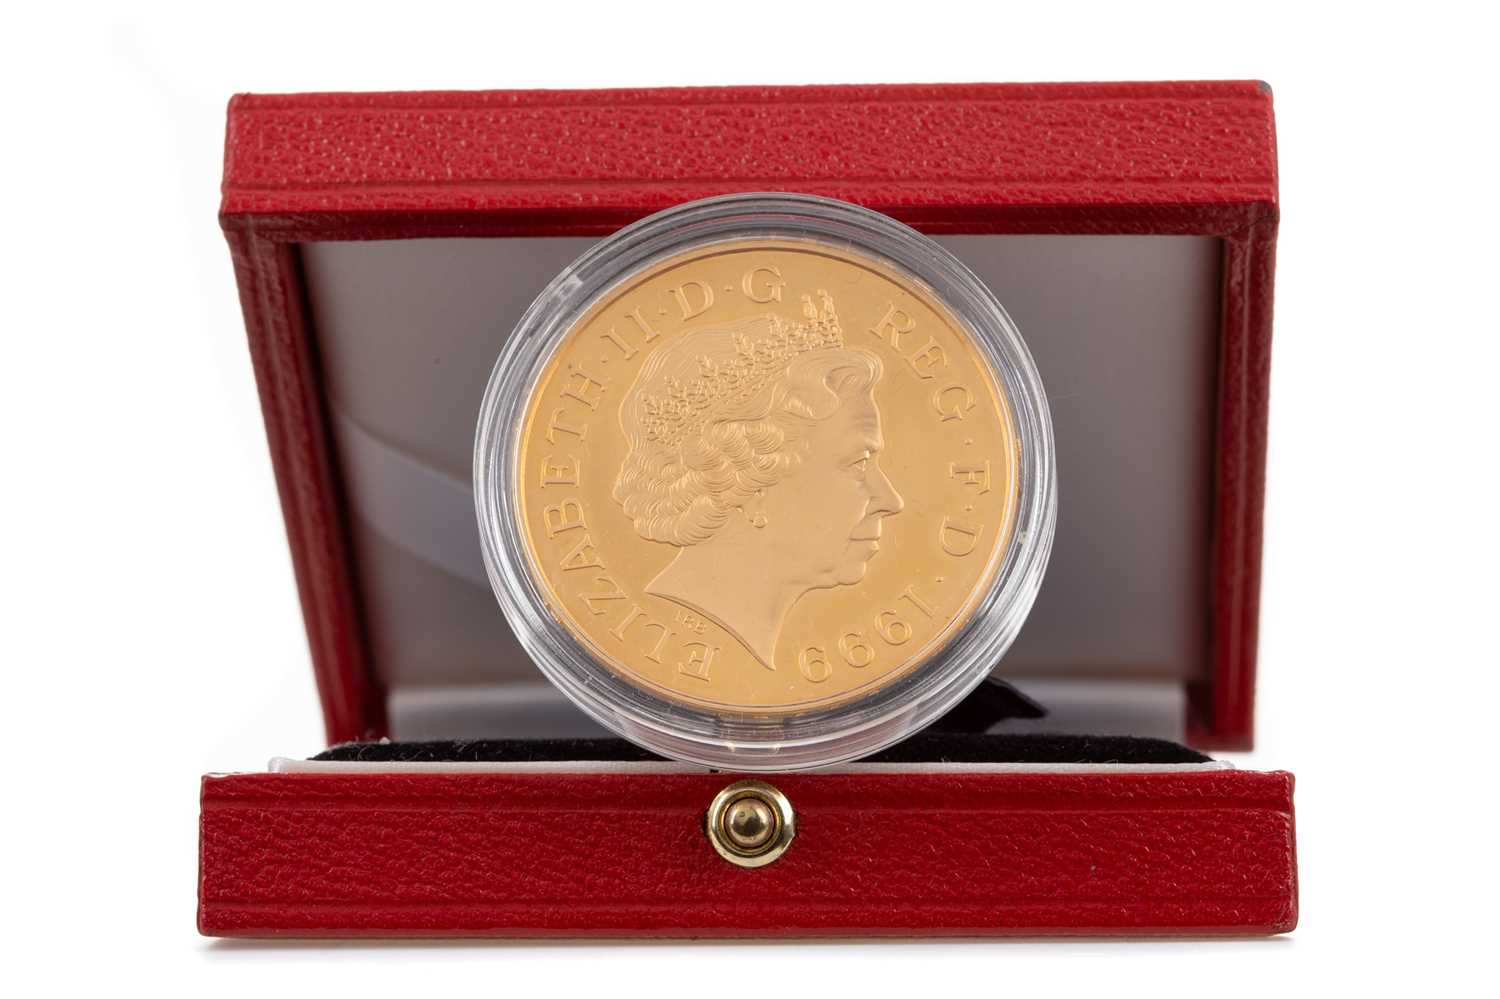 Lot 52 - THE 2000 UNITED KINGDOM GOLD PROOF FIVE POUND CROWN